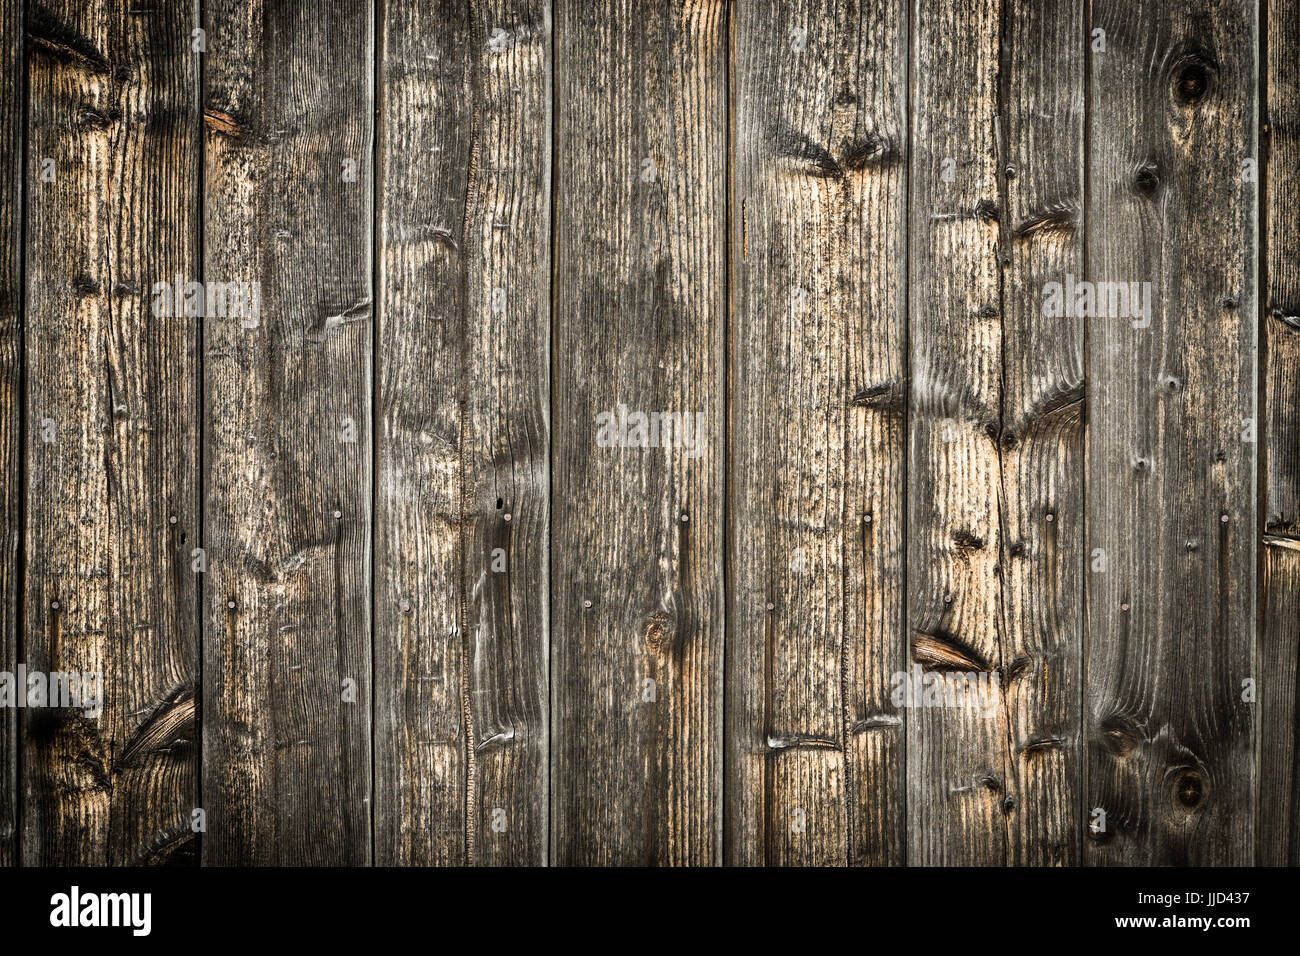 Natural Brown Barn Wood Wall Wooden Textured Background